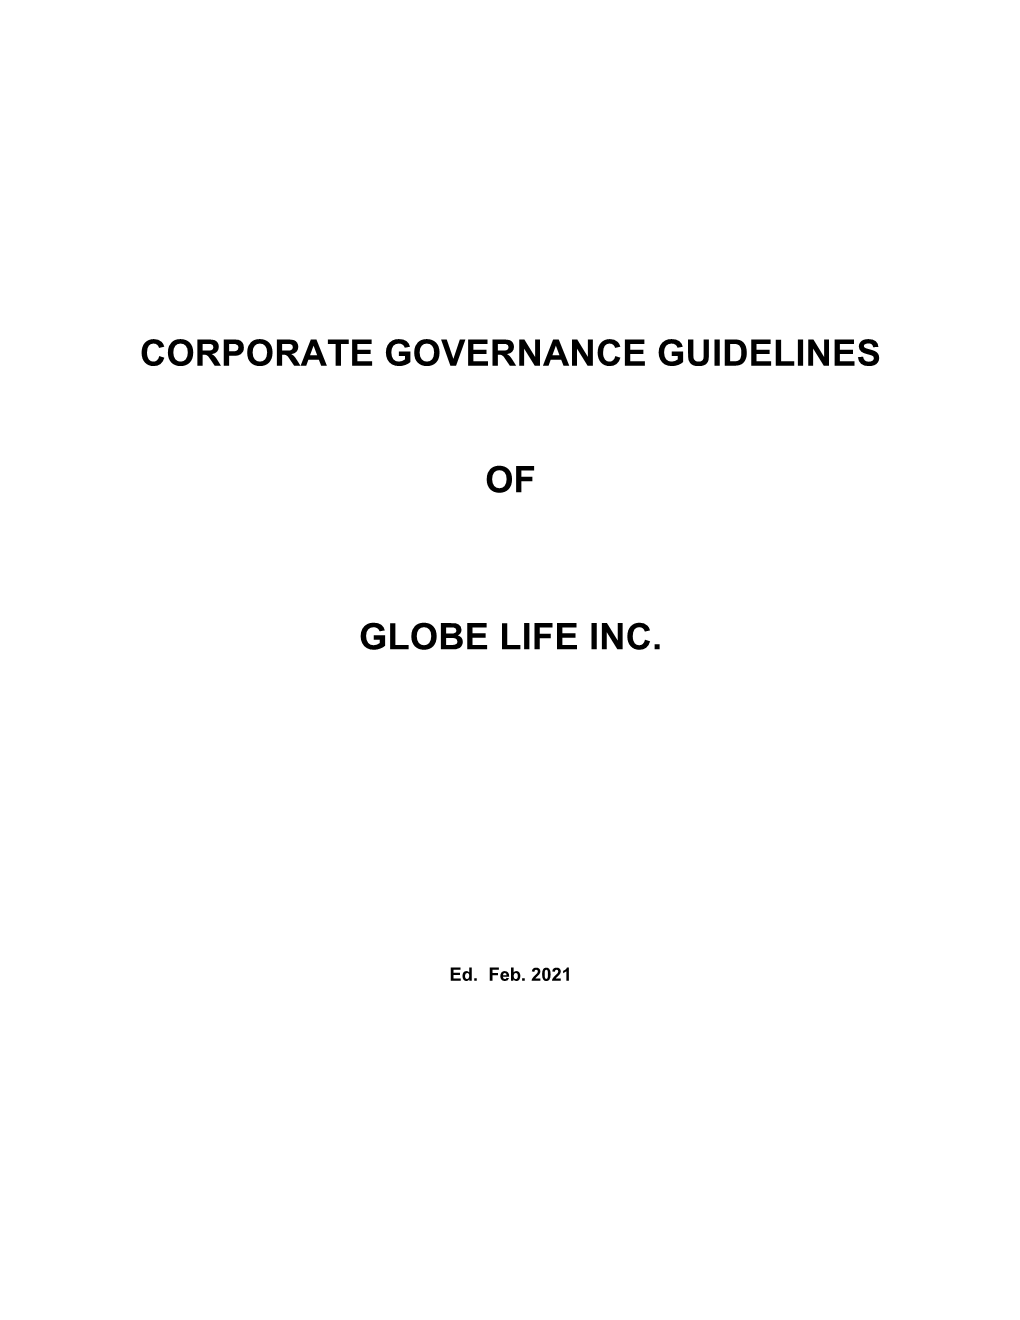 Corporate Governance Guidelines of Globe Life Inc